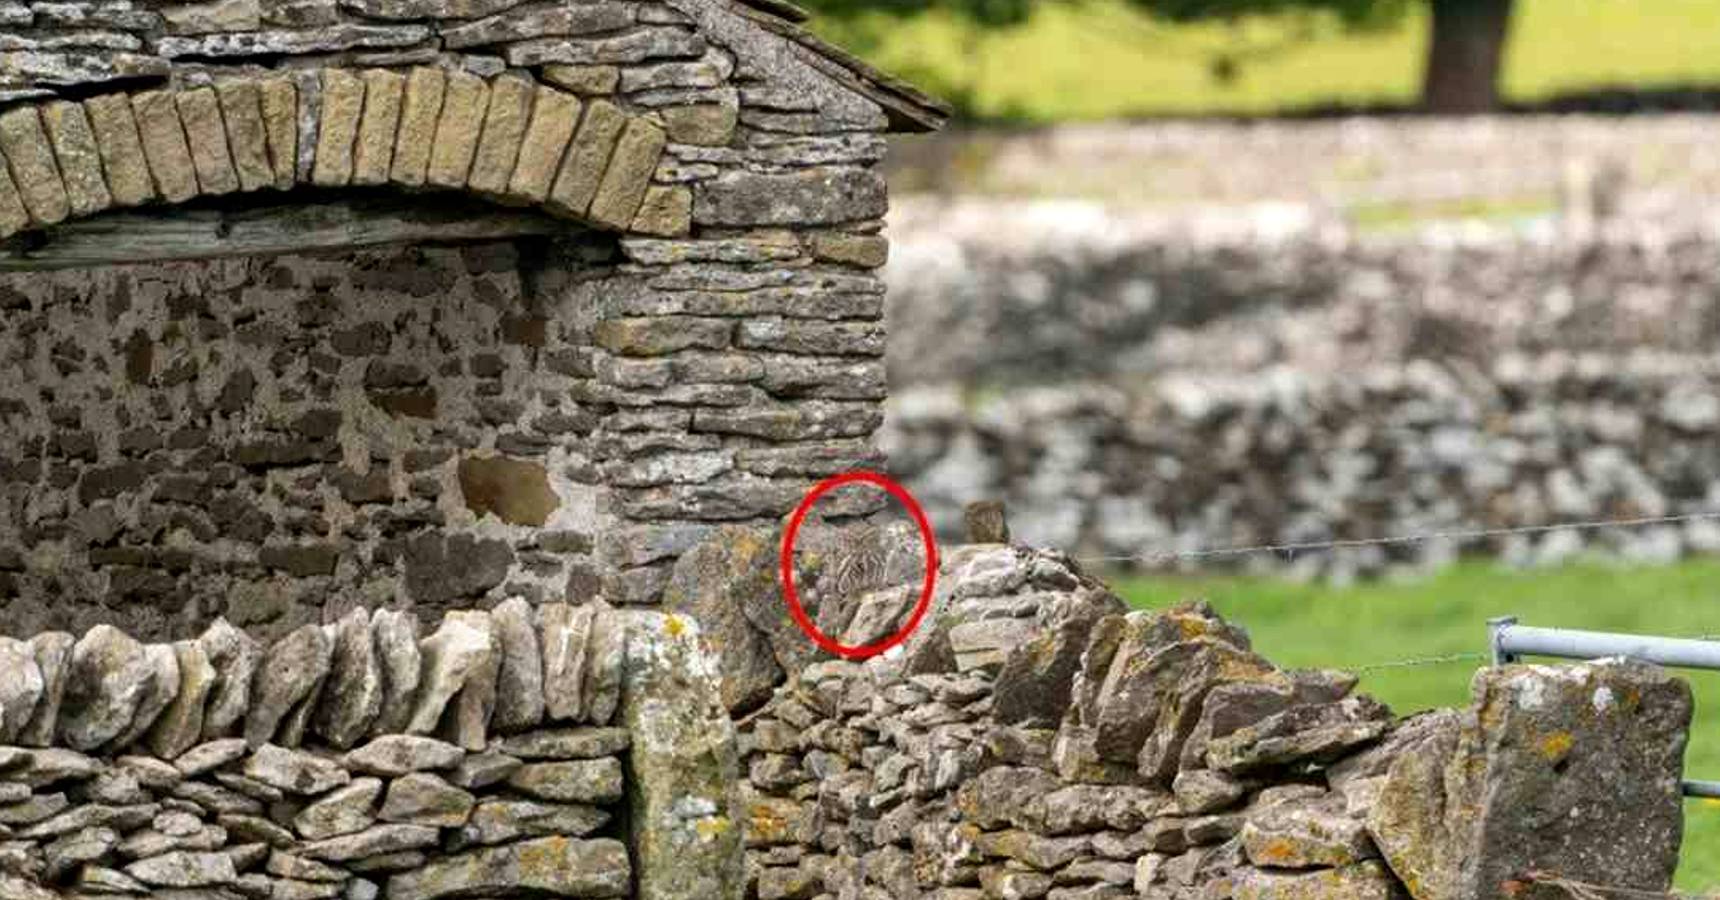 Optical illusion, Optical illusion owl in between rock house